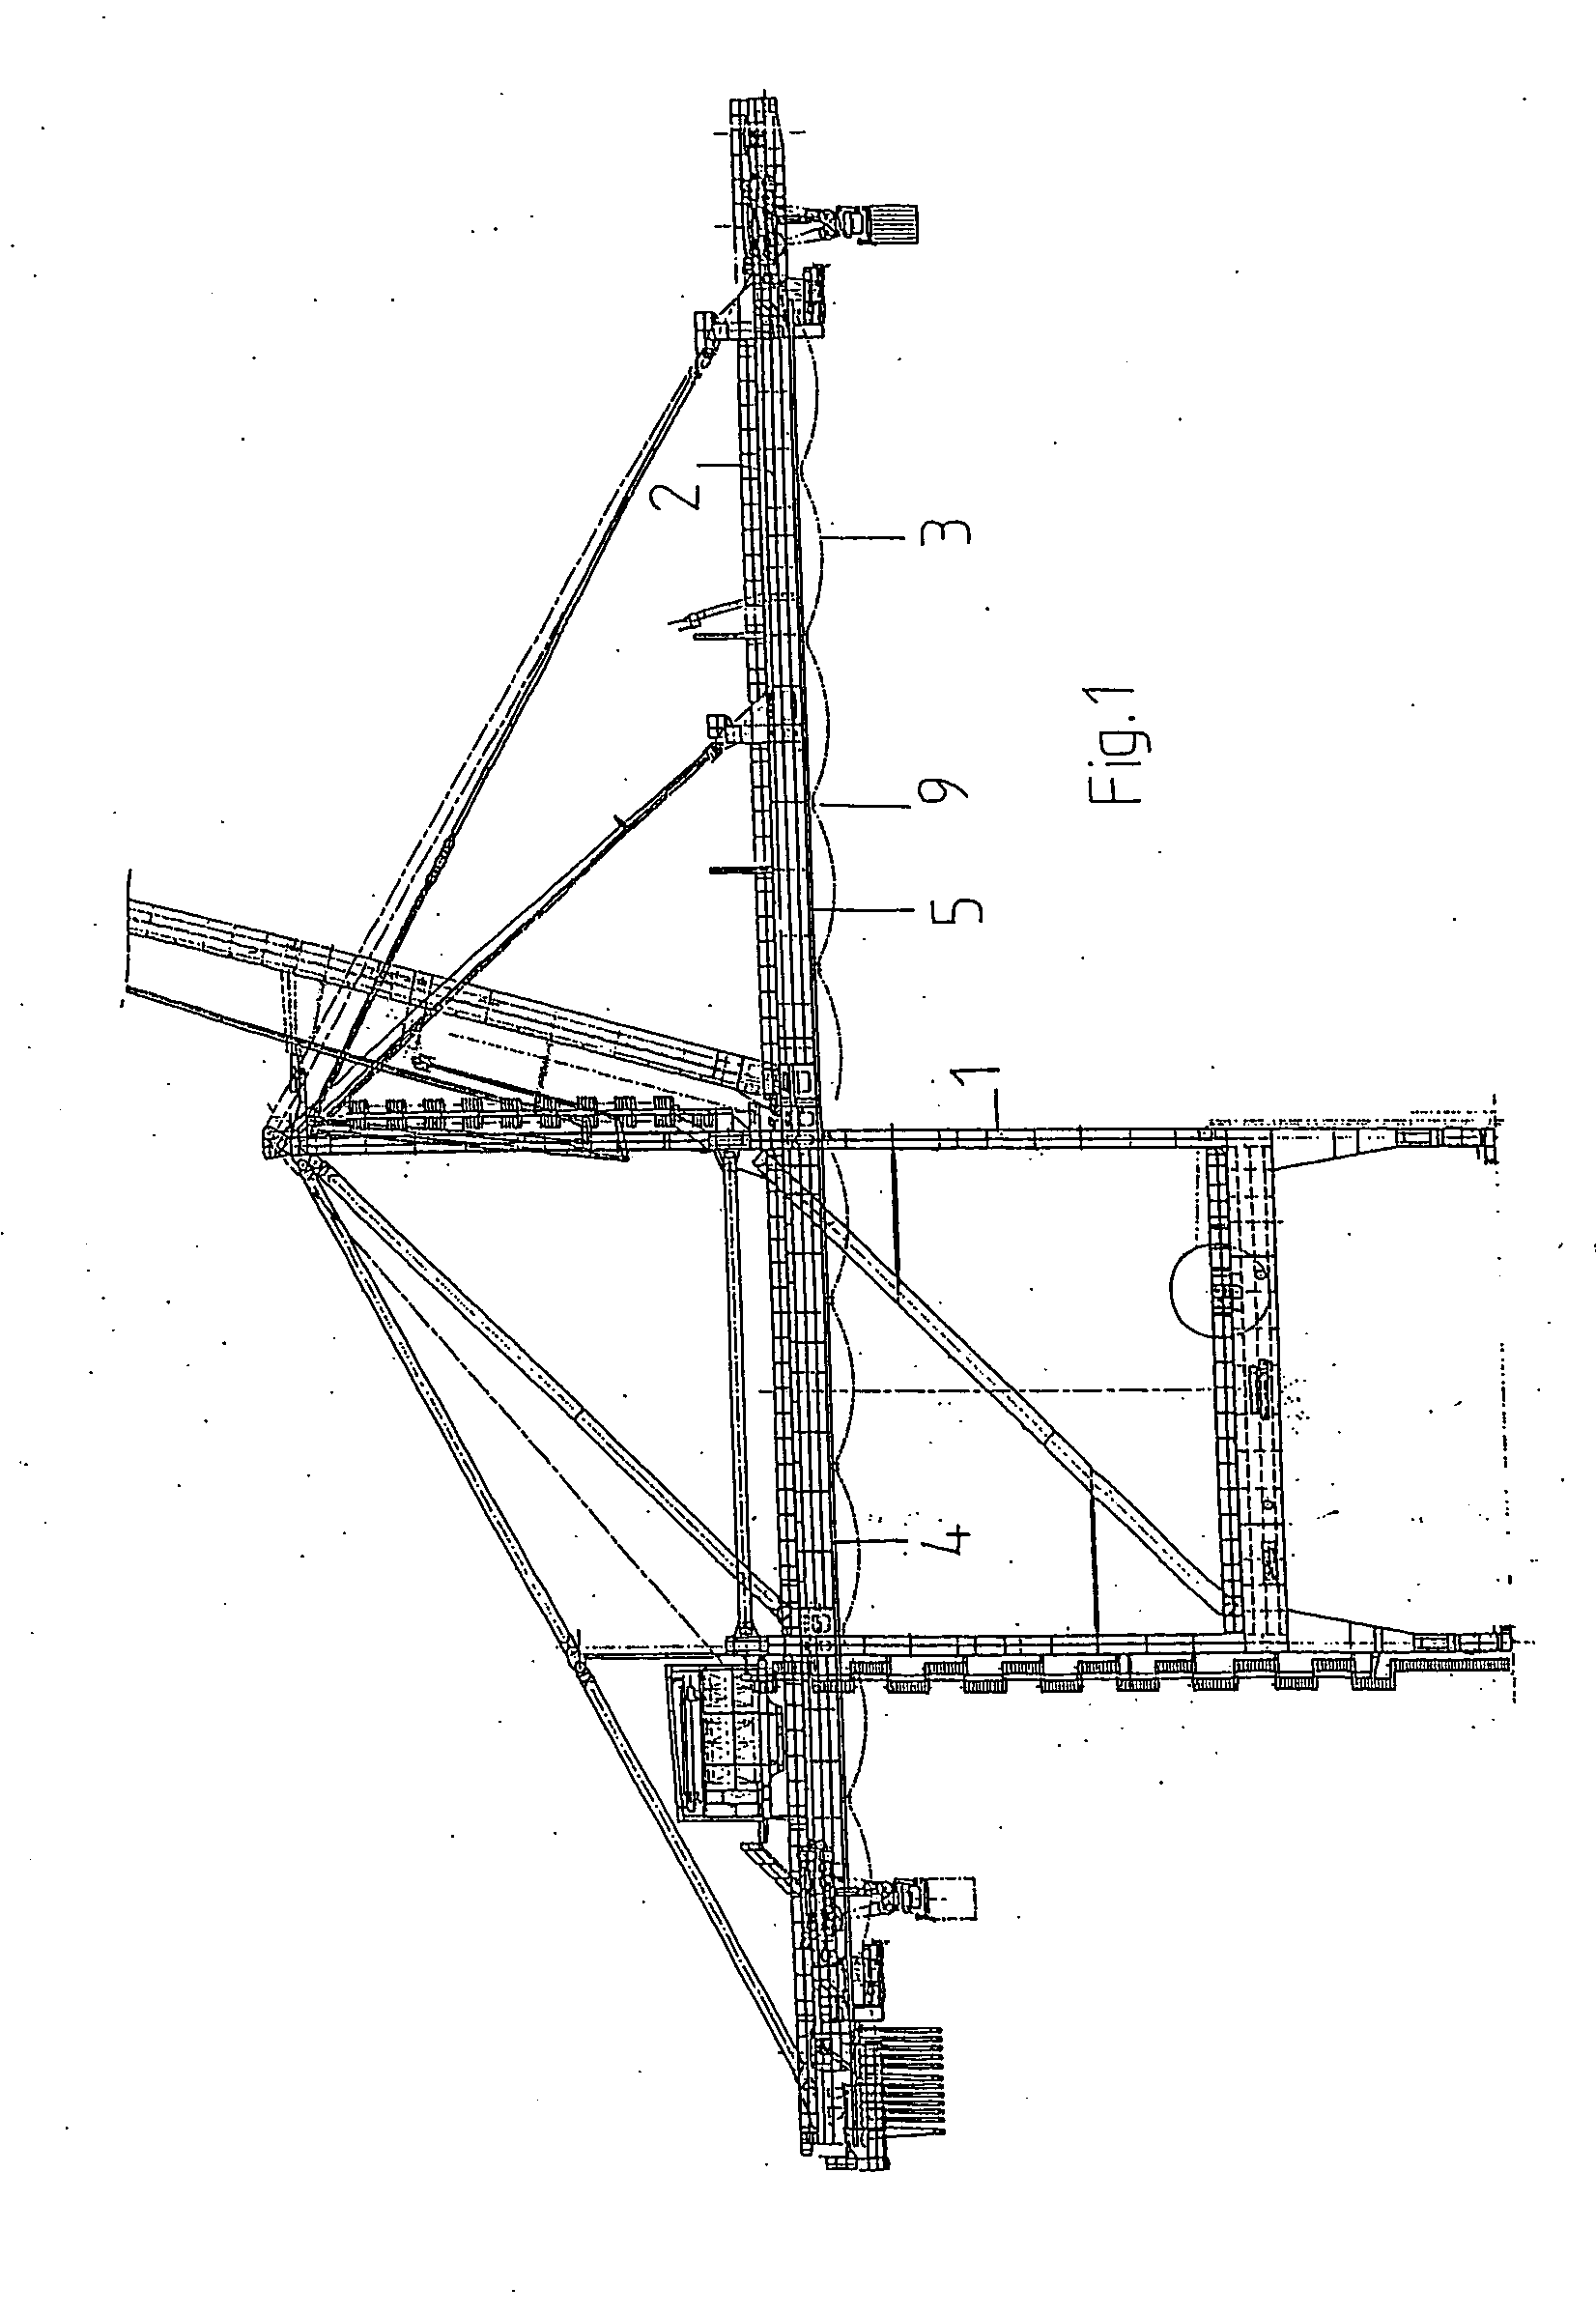 Crane with boom and running track for a cable carrier